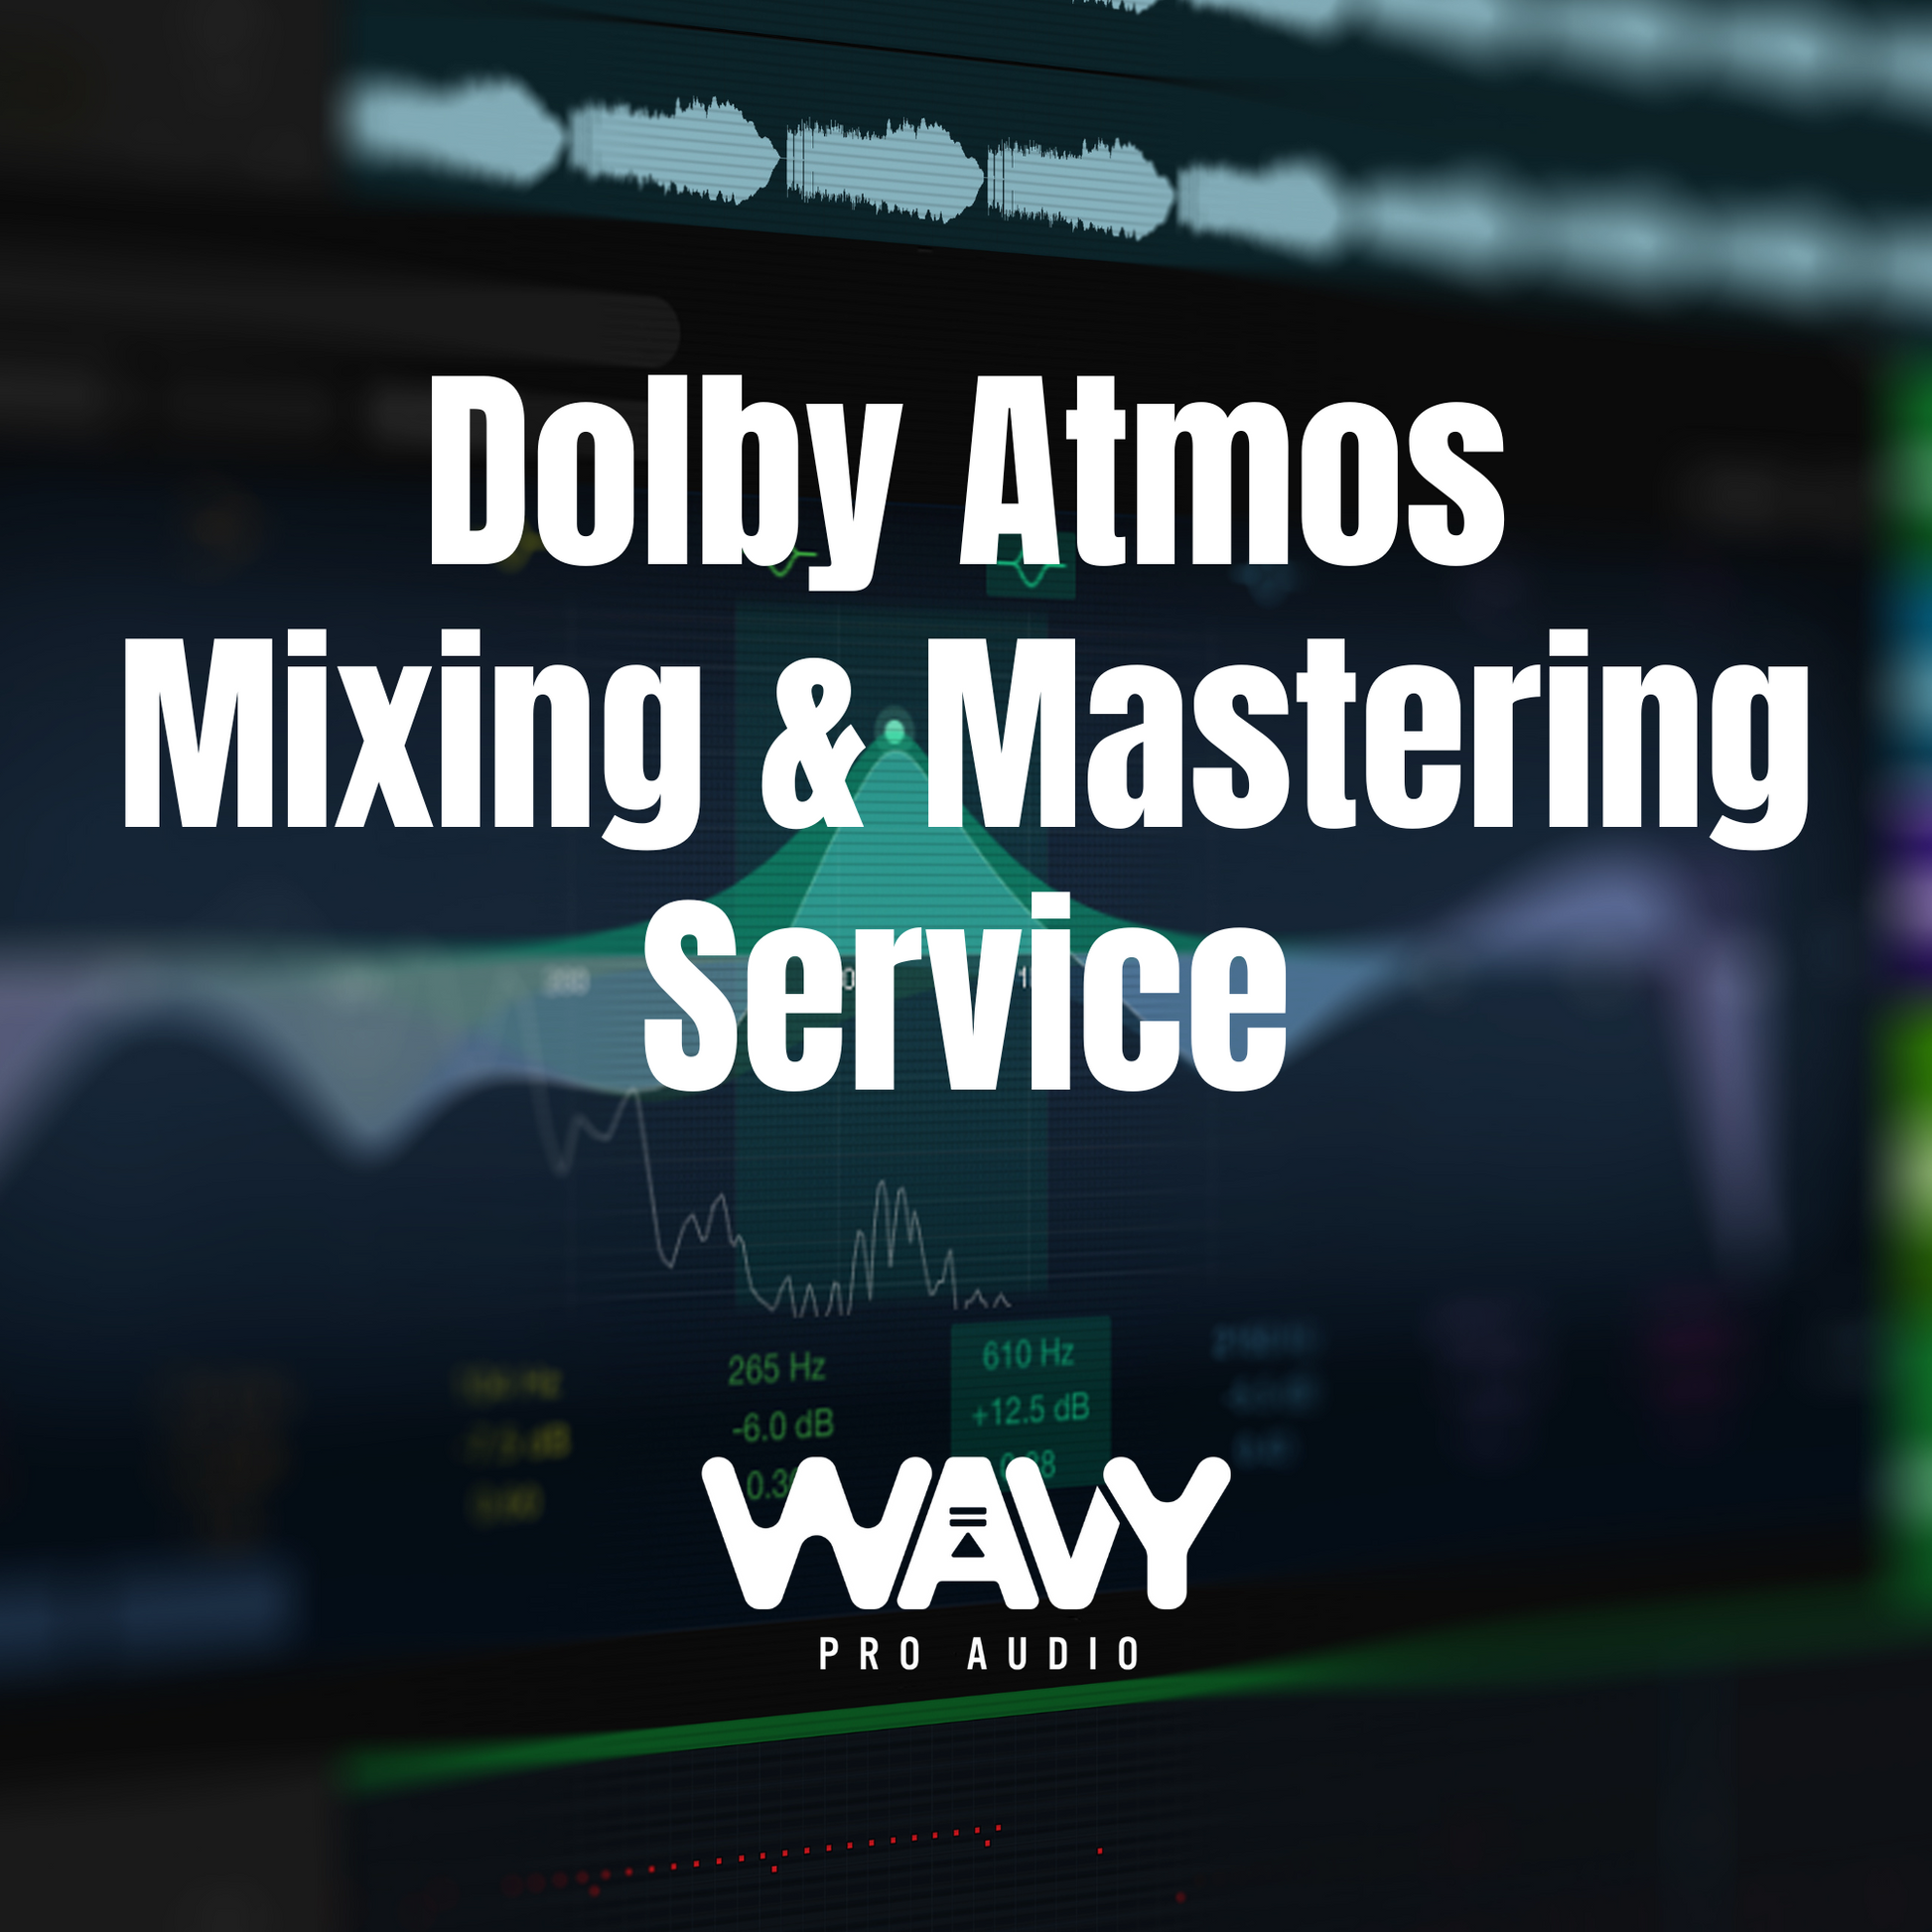 Dolby Atmos Mixing & Mastering Service